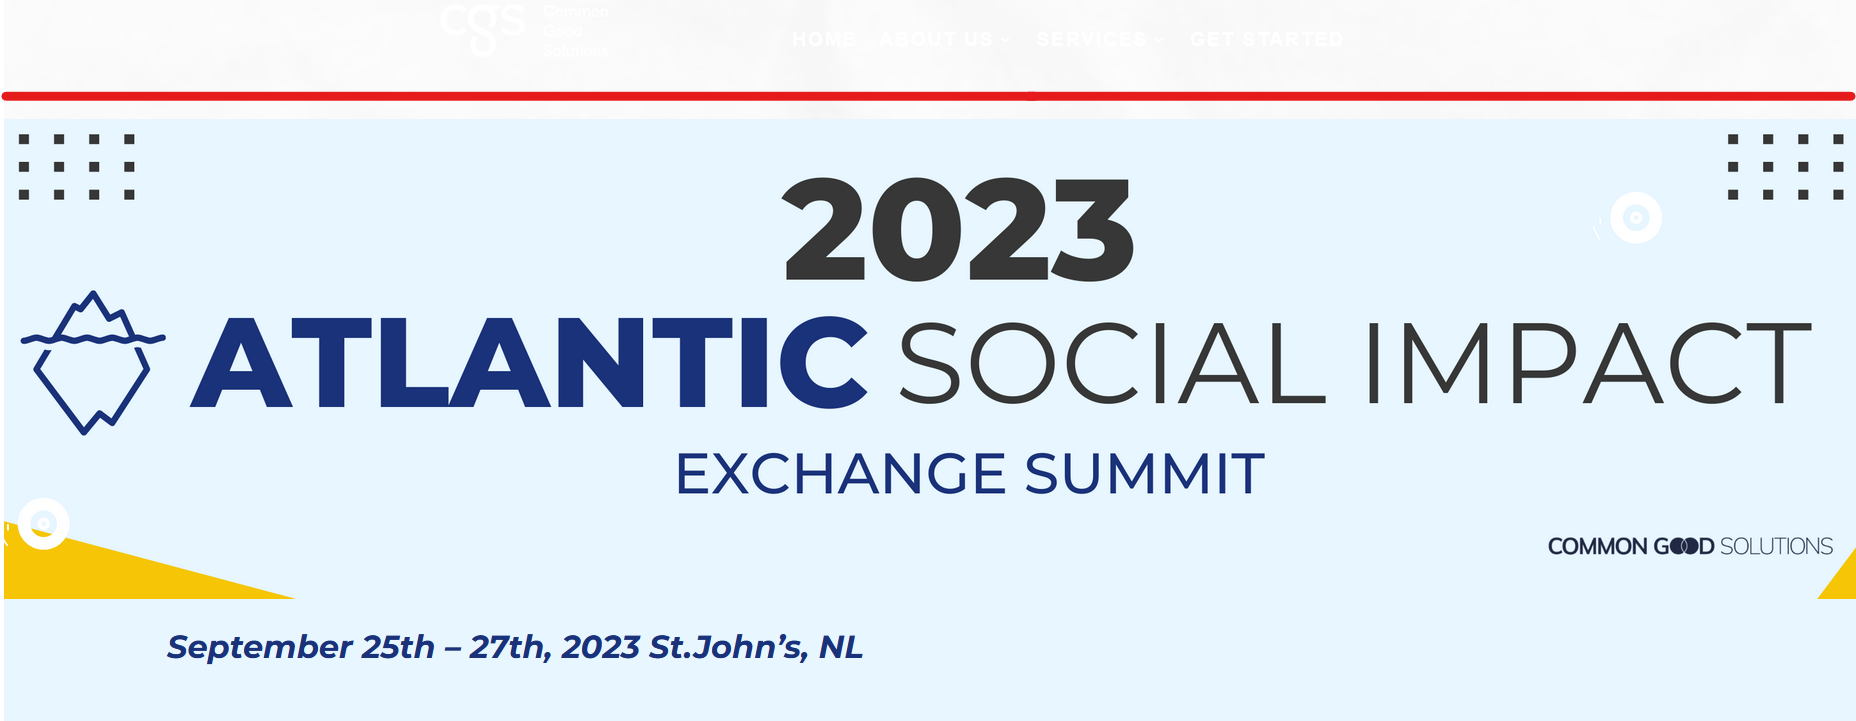 2023 Atlantic social impact exchange summit by common good solutions, September 25th-27th, St. John's NL